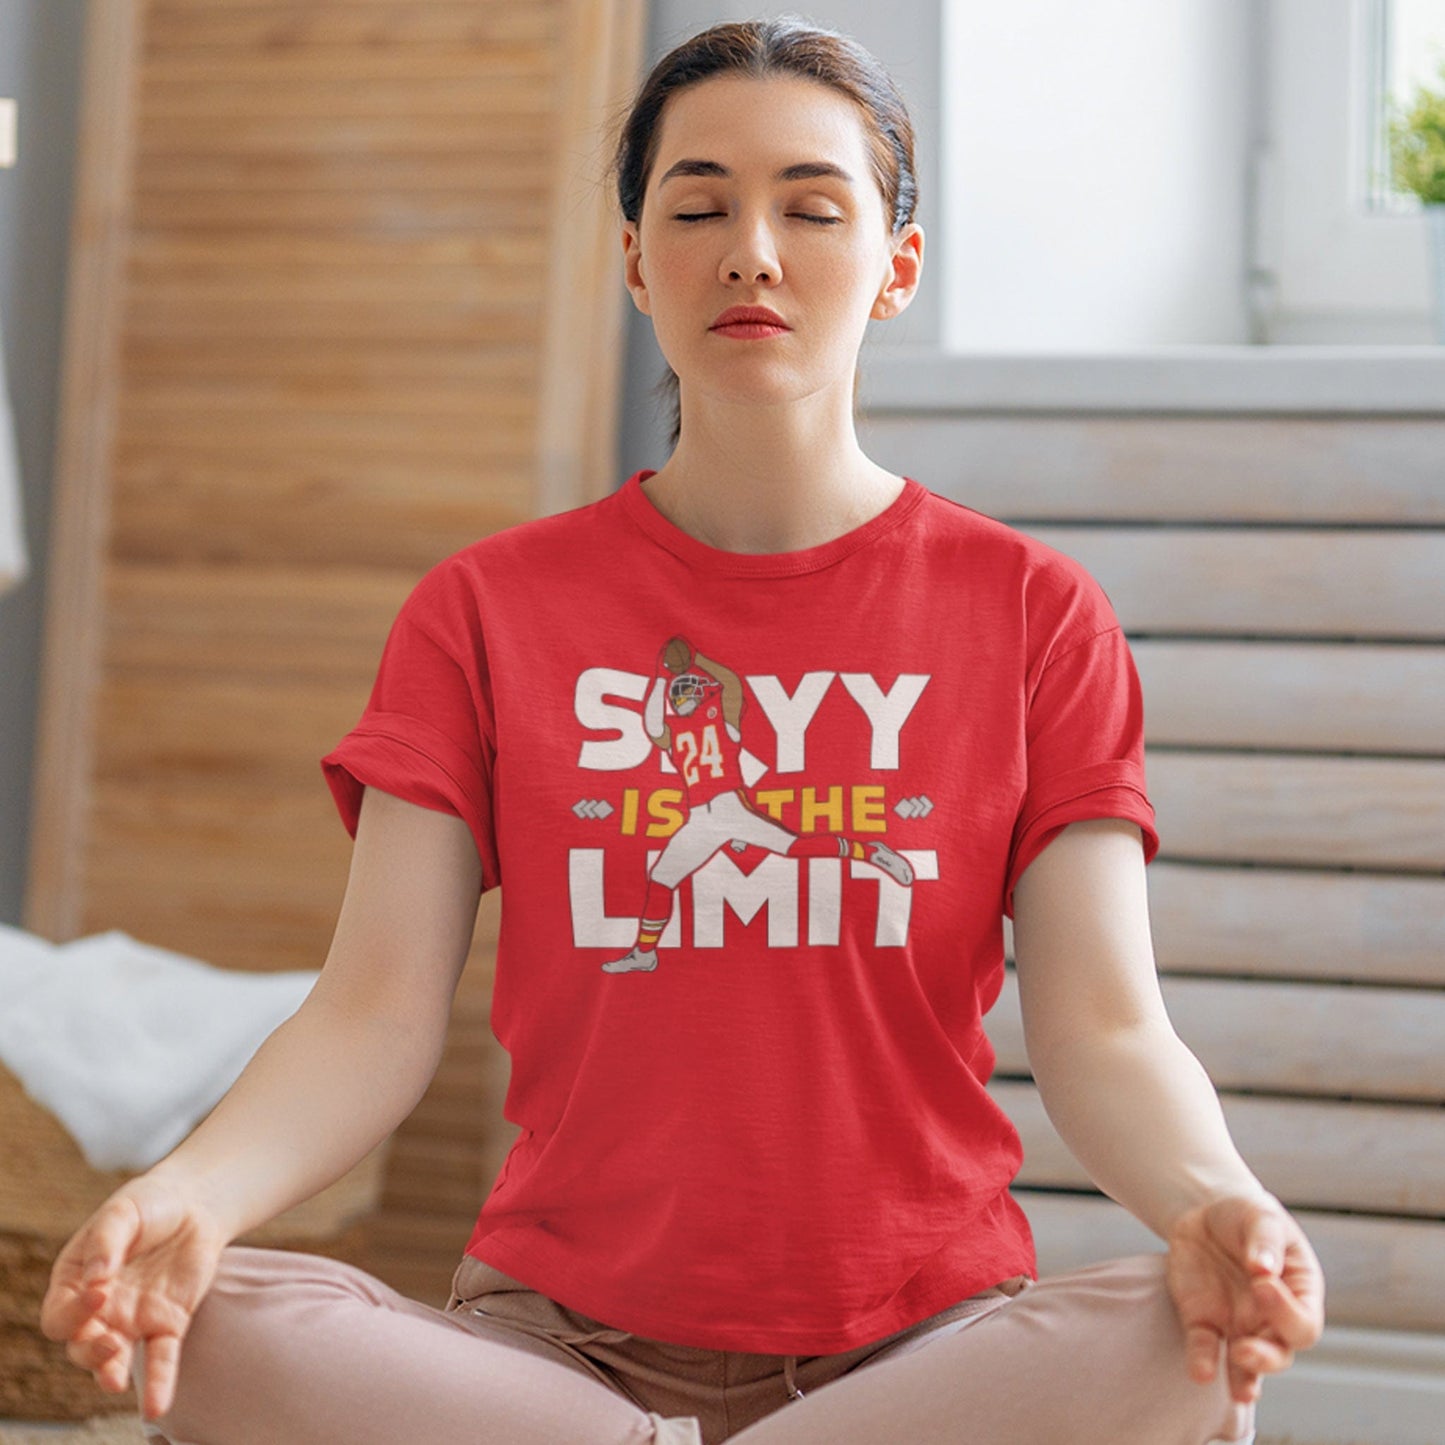 KC Swag Kansas City Chiefs SKYY IS THE LIMIT with football player graphic on heather red t-shirt worn by female model meditating on the floor